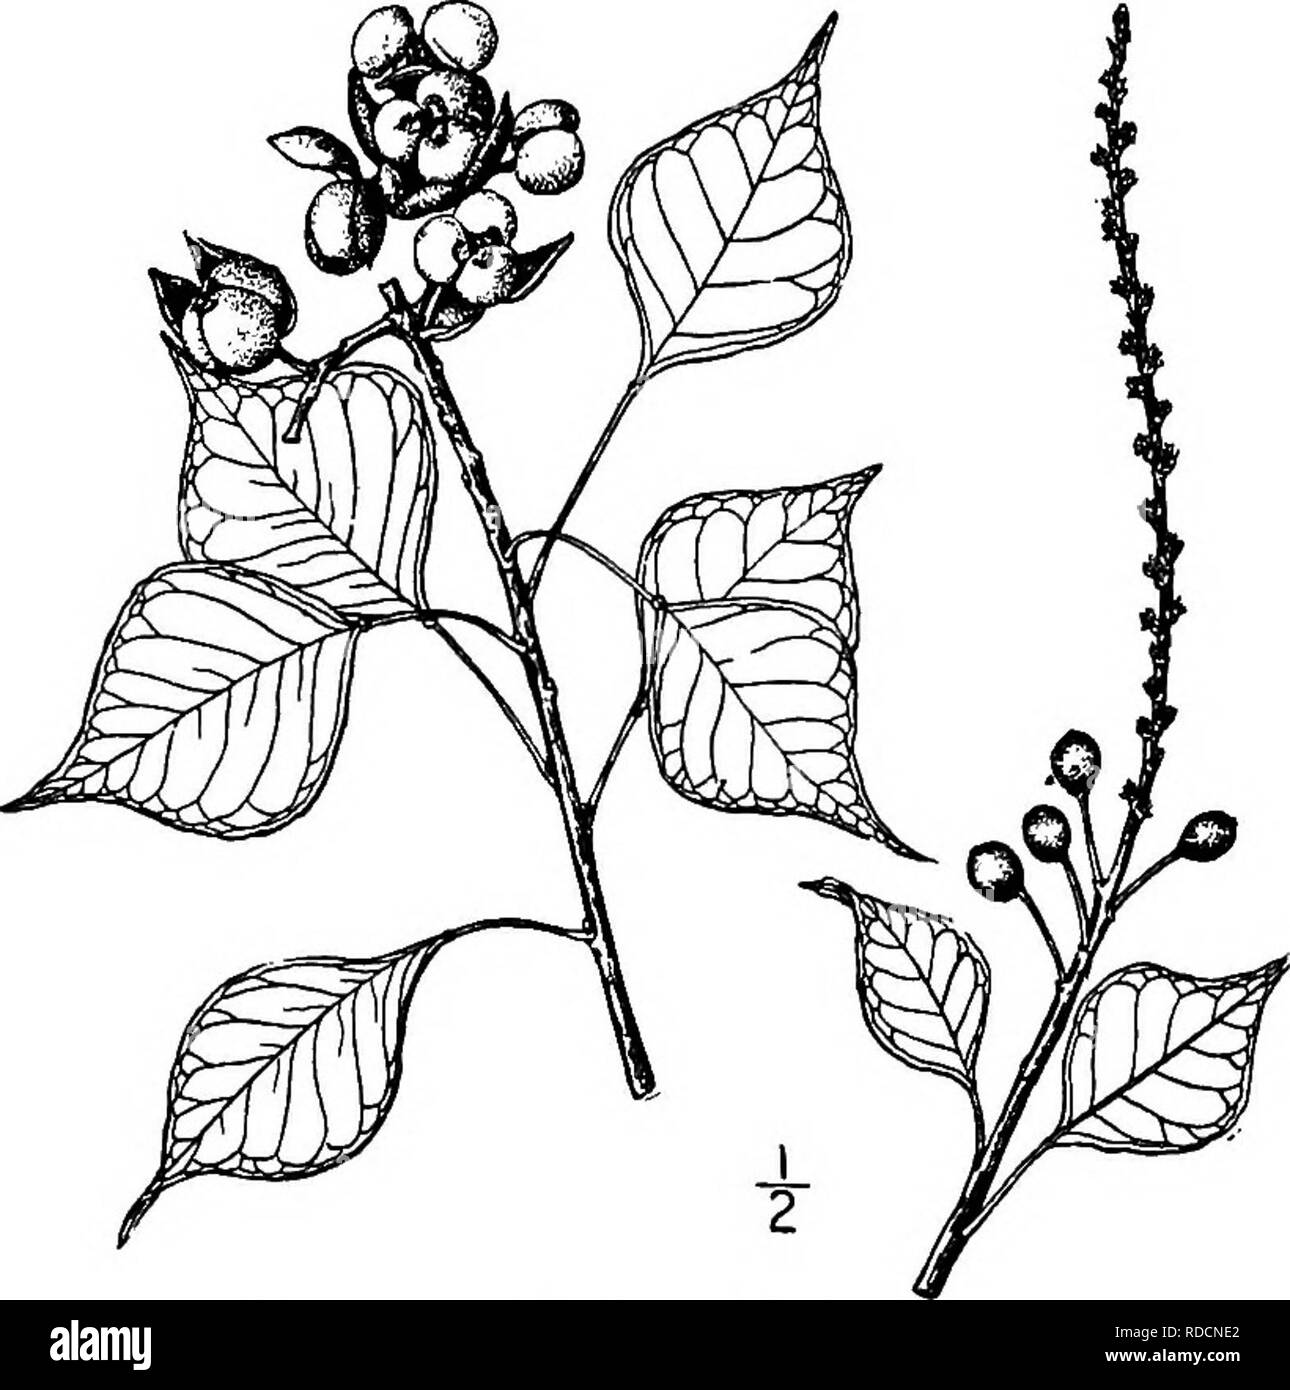 . North American trees : being descriptions and illustrations of the trees growing independently of cultivation in North America, north of Mexico and the West Indies . Trees. South American Milk Tree 6oi I. CHINESE TALLOW TREE — Sapium sebiferum (Linnaeus) Roxburgh Croton sebiferum Linnaeus. Stillingia sebijera Michaux This large poplar-like tree has been introduced into our area as a shade tree from China or Japan, and has become naturalized from North Carolina to Florida and Louisiana, where it reaches a maximum height of 15 meters. The bark is about 10 mm. thick, rather smooth and reddish b Stock Photo